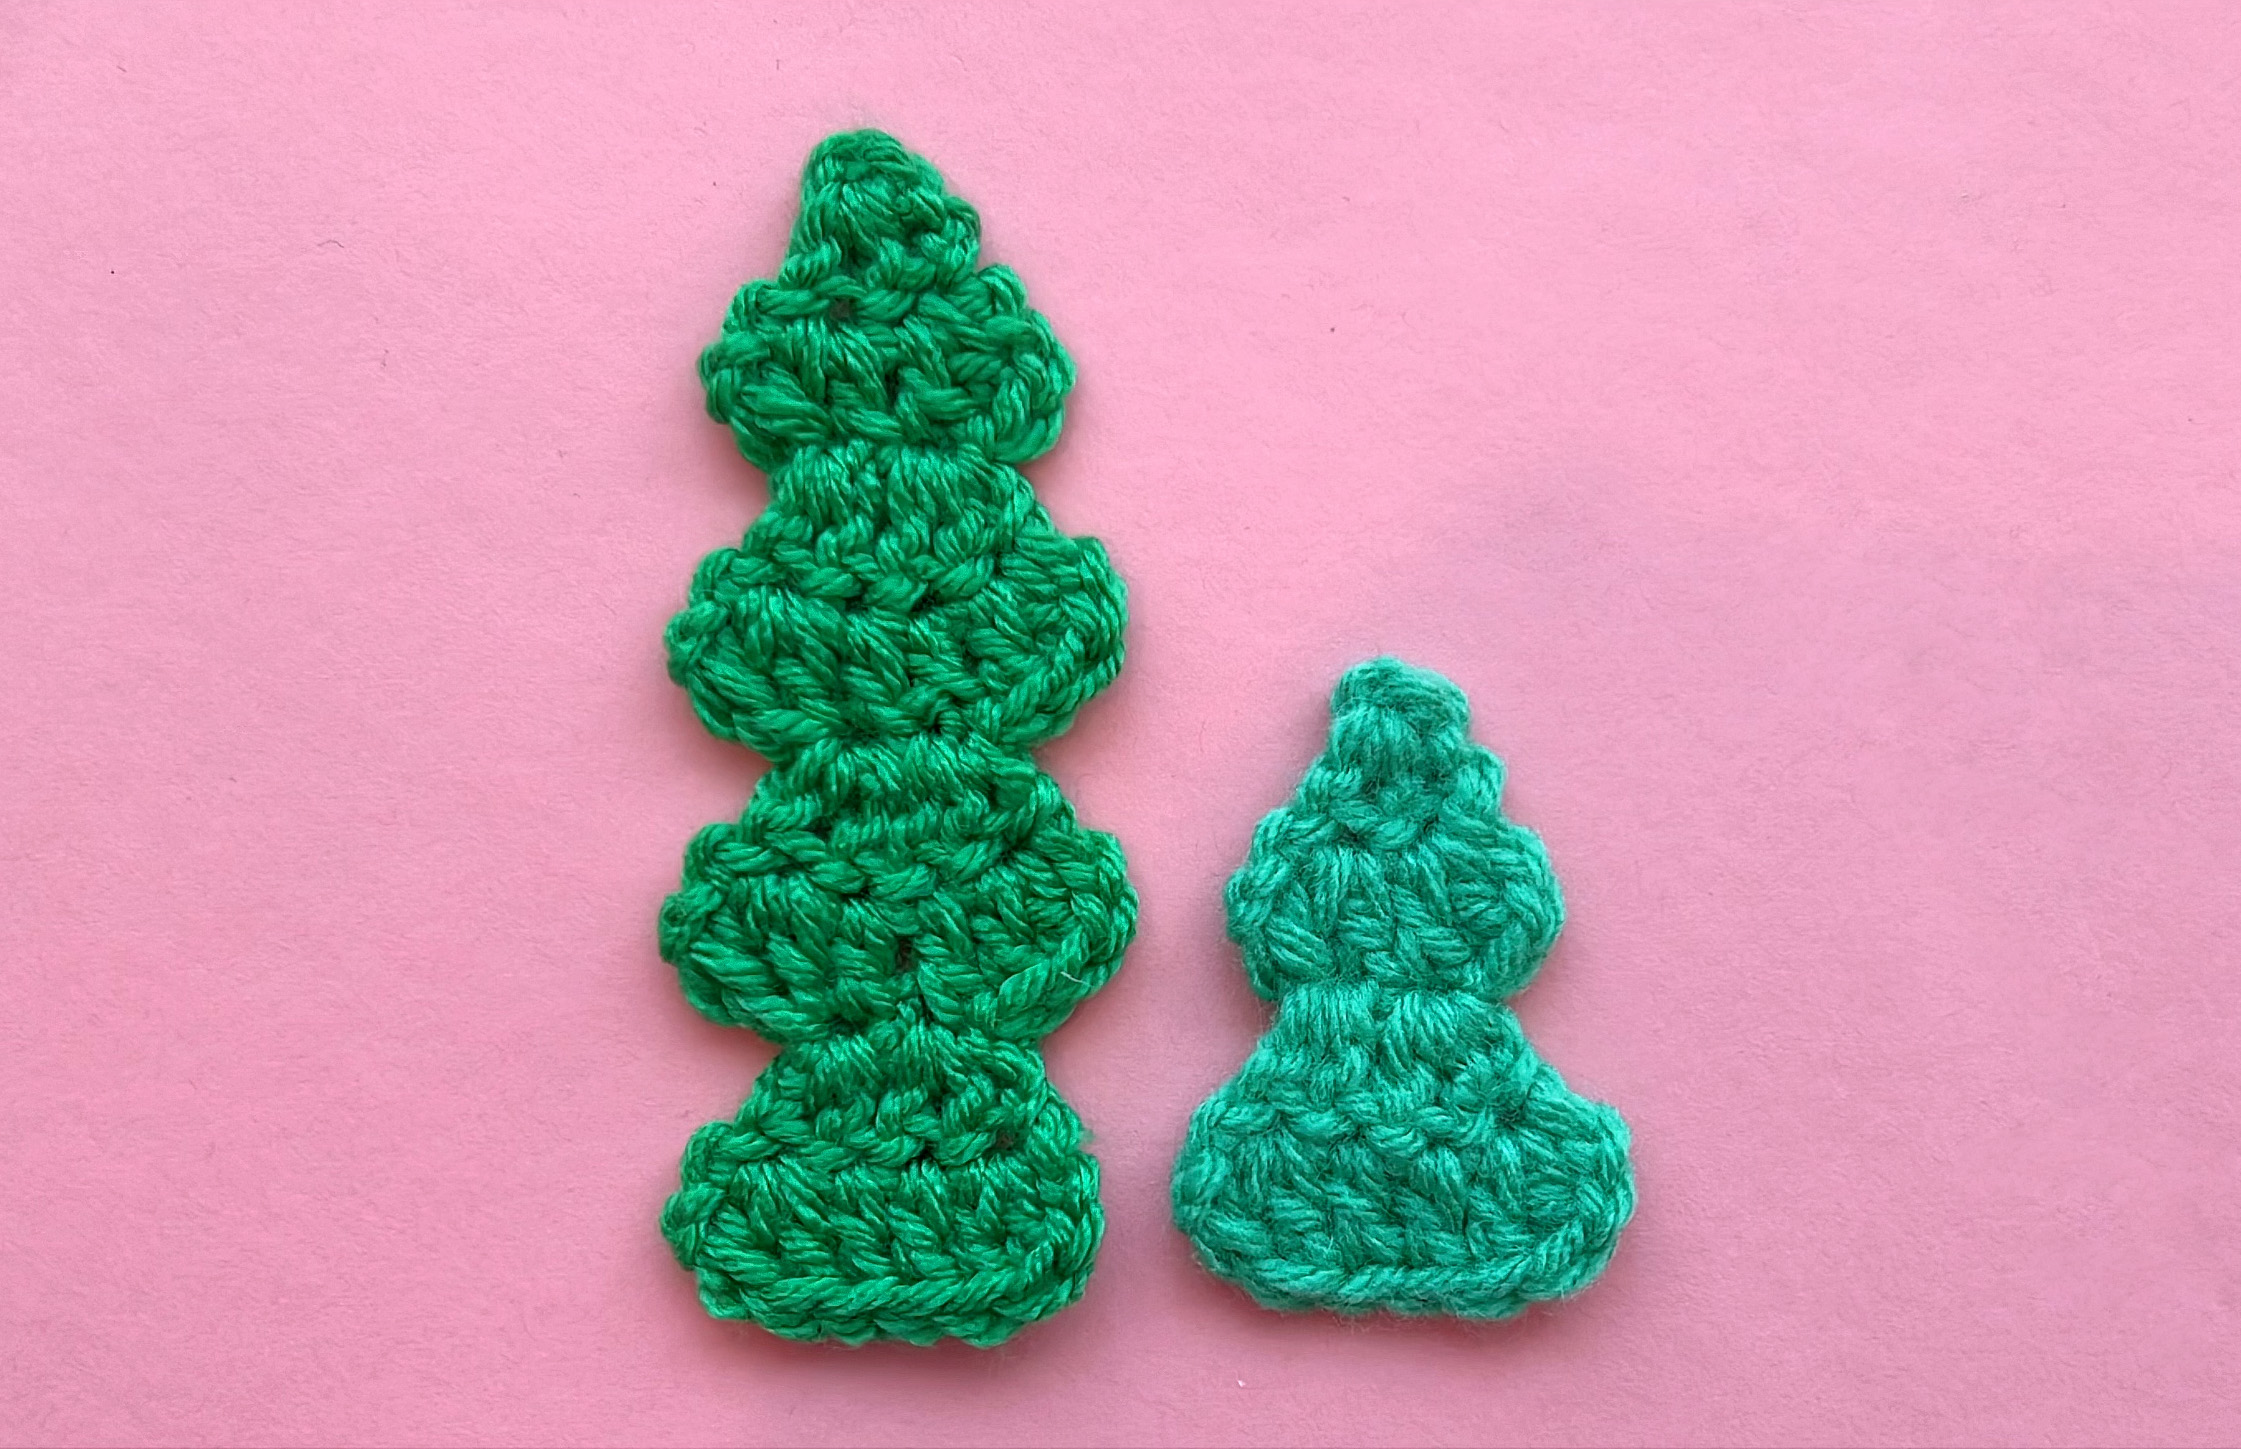 2 small flat crocheted Christmas trees of different heights and different shades of green on a pink background